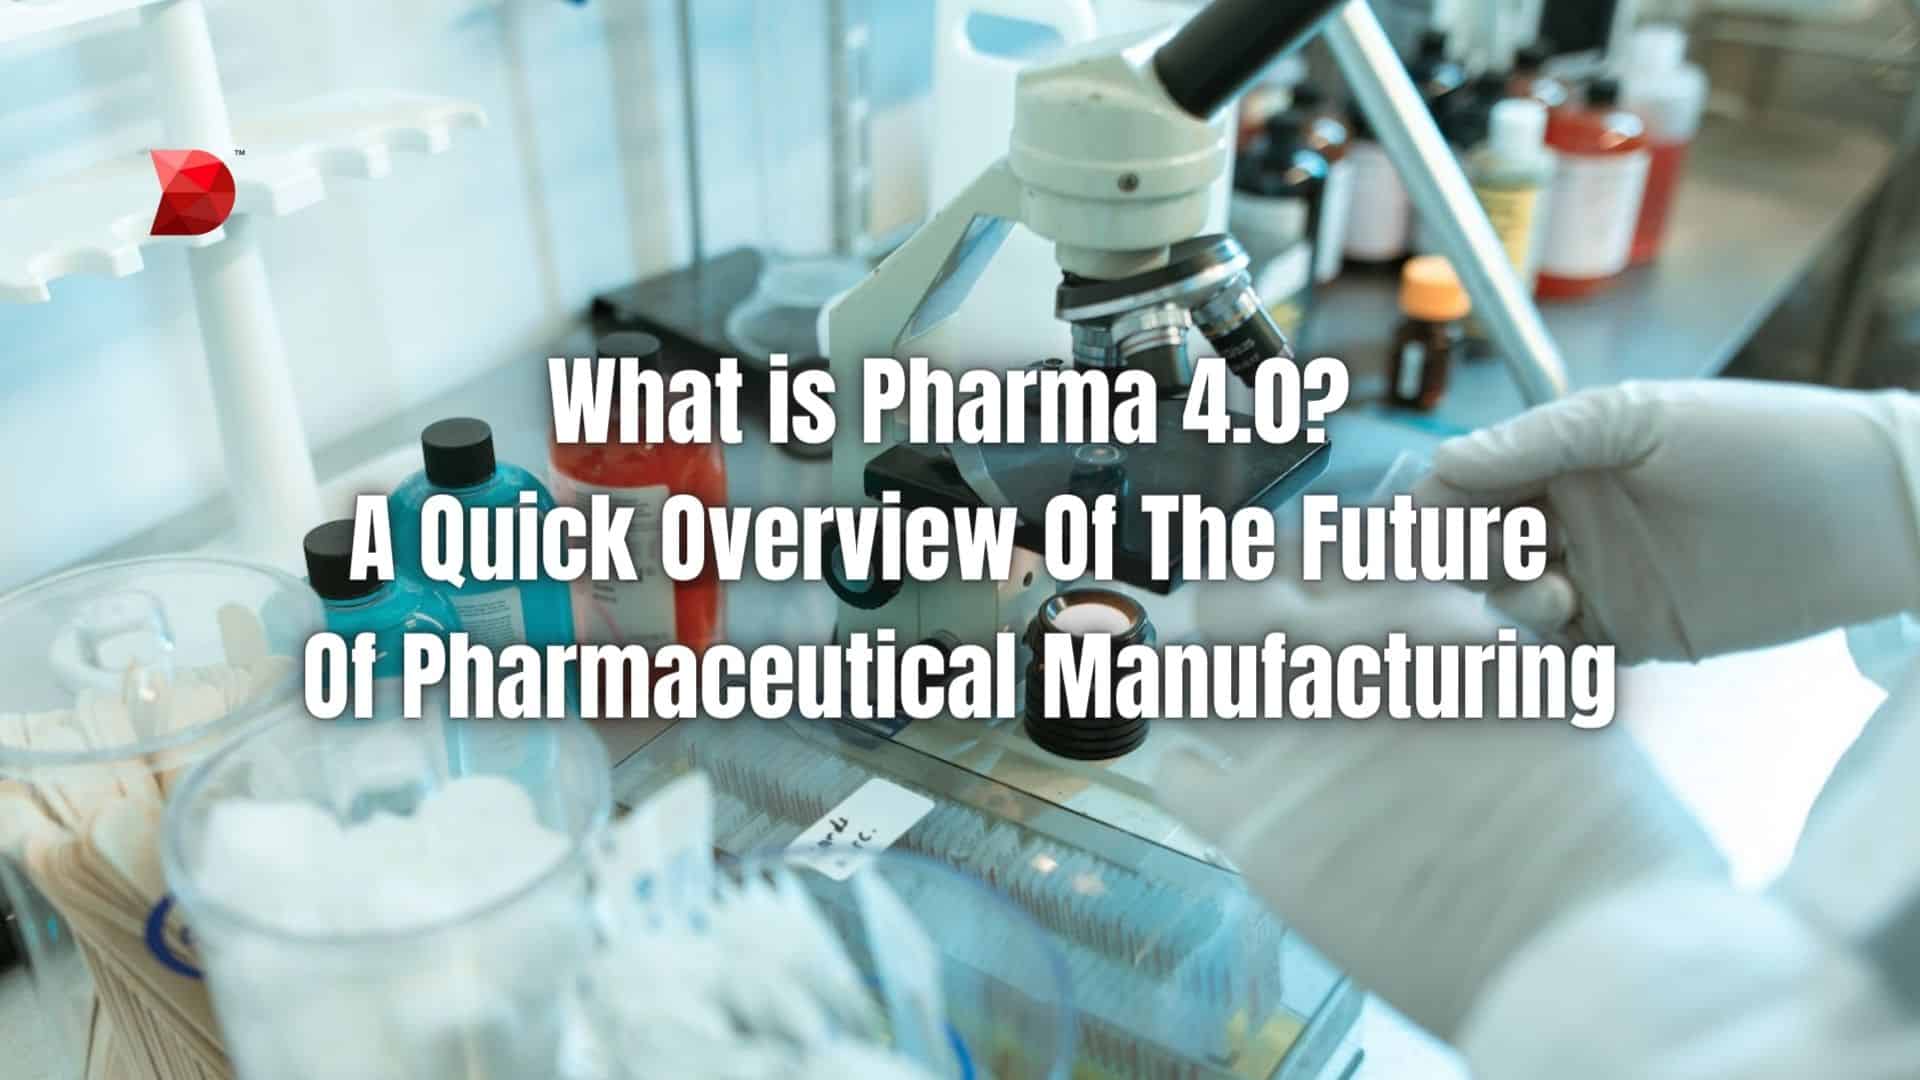 What is Pharma 4.0 A Quick Overview Of The Future Of Pharmaceutical Manufacturing